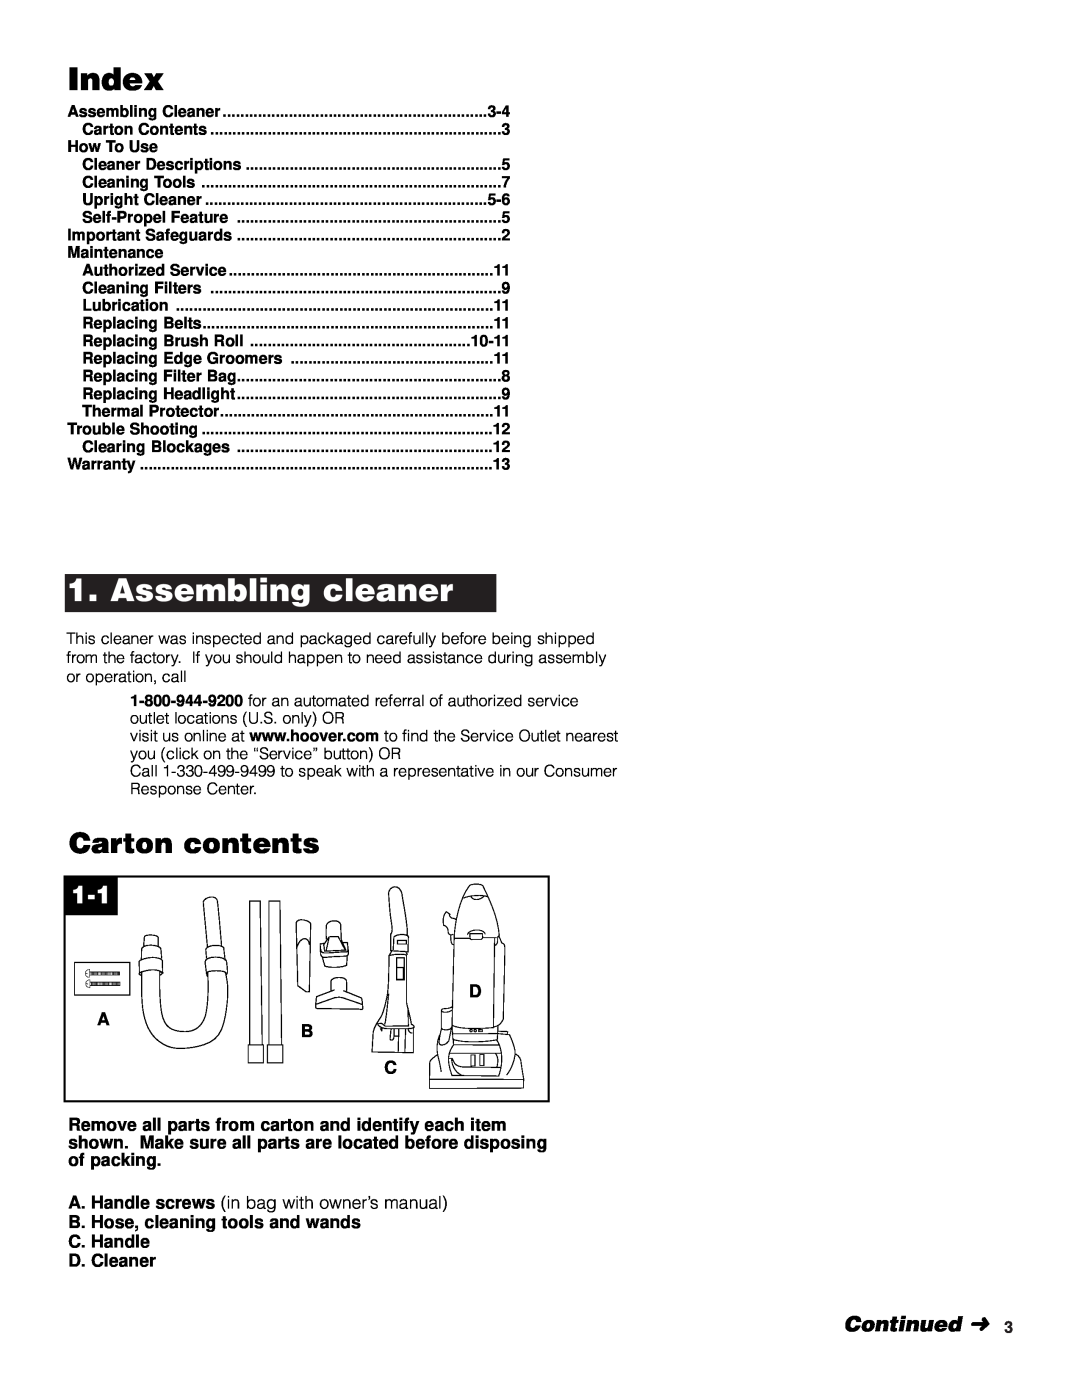 Hoover Self-Propelled WindTunnel Cleaner manual Index, Carton contents, Continued, Assembling cleaner 